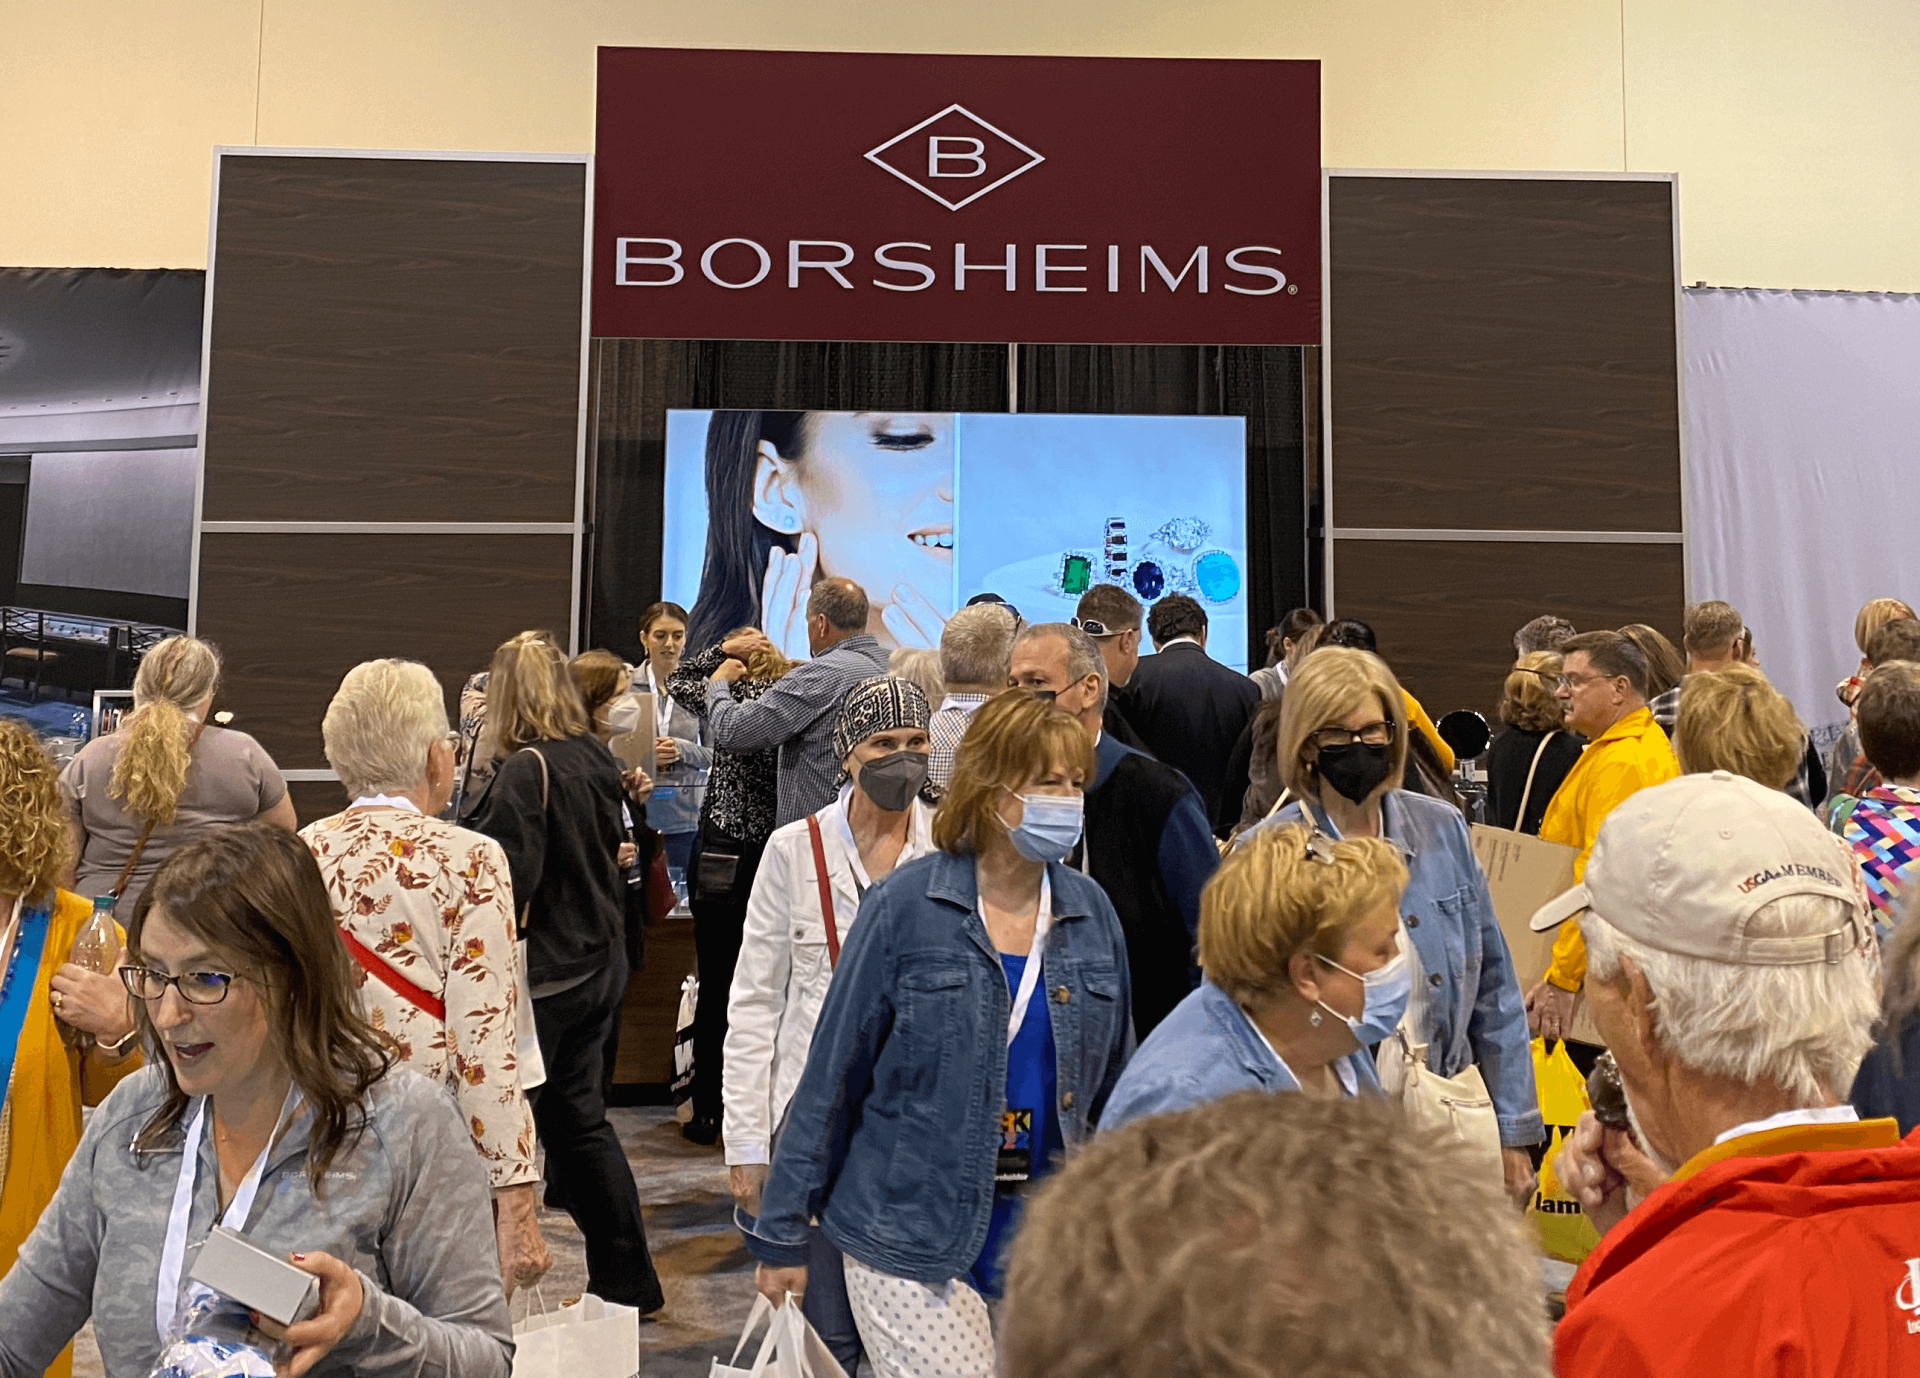 Borsheims booth at the Berkshire Bazaar of Bargains 2022